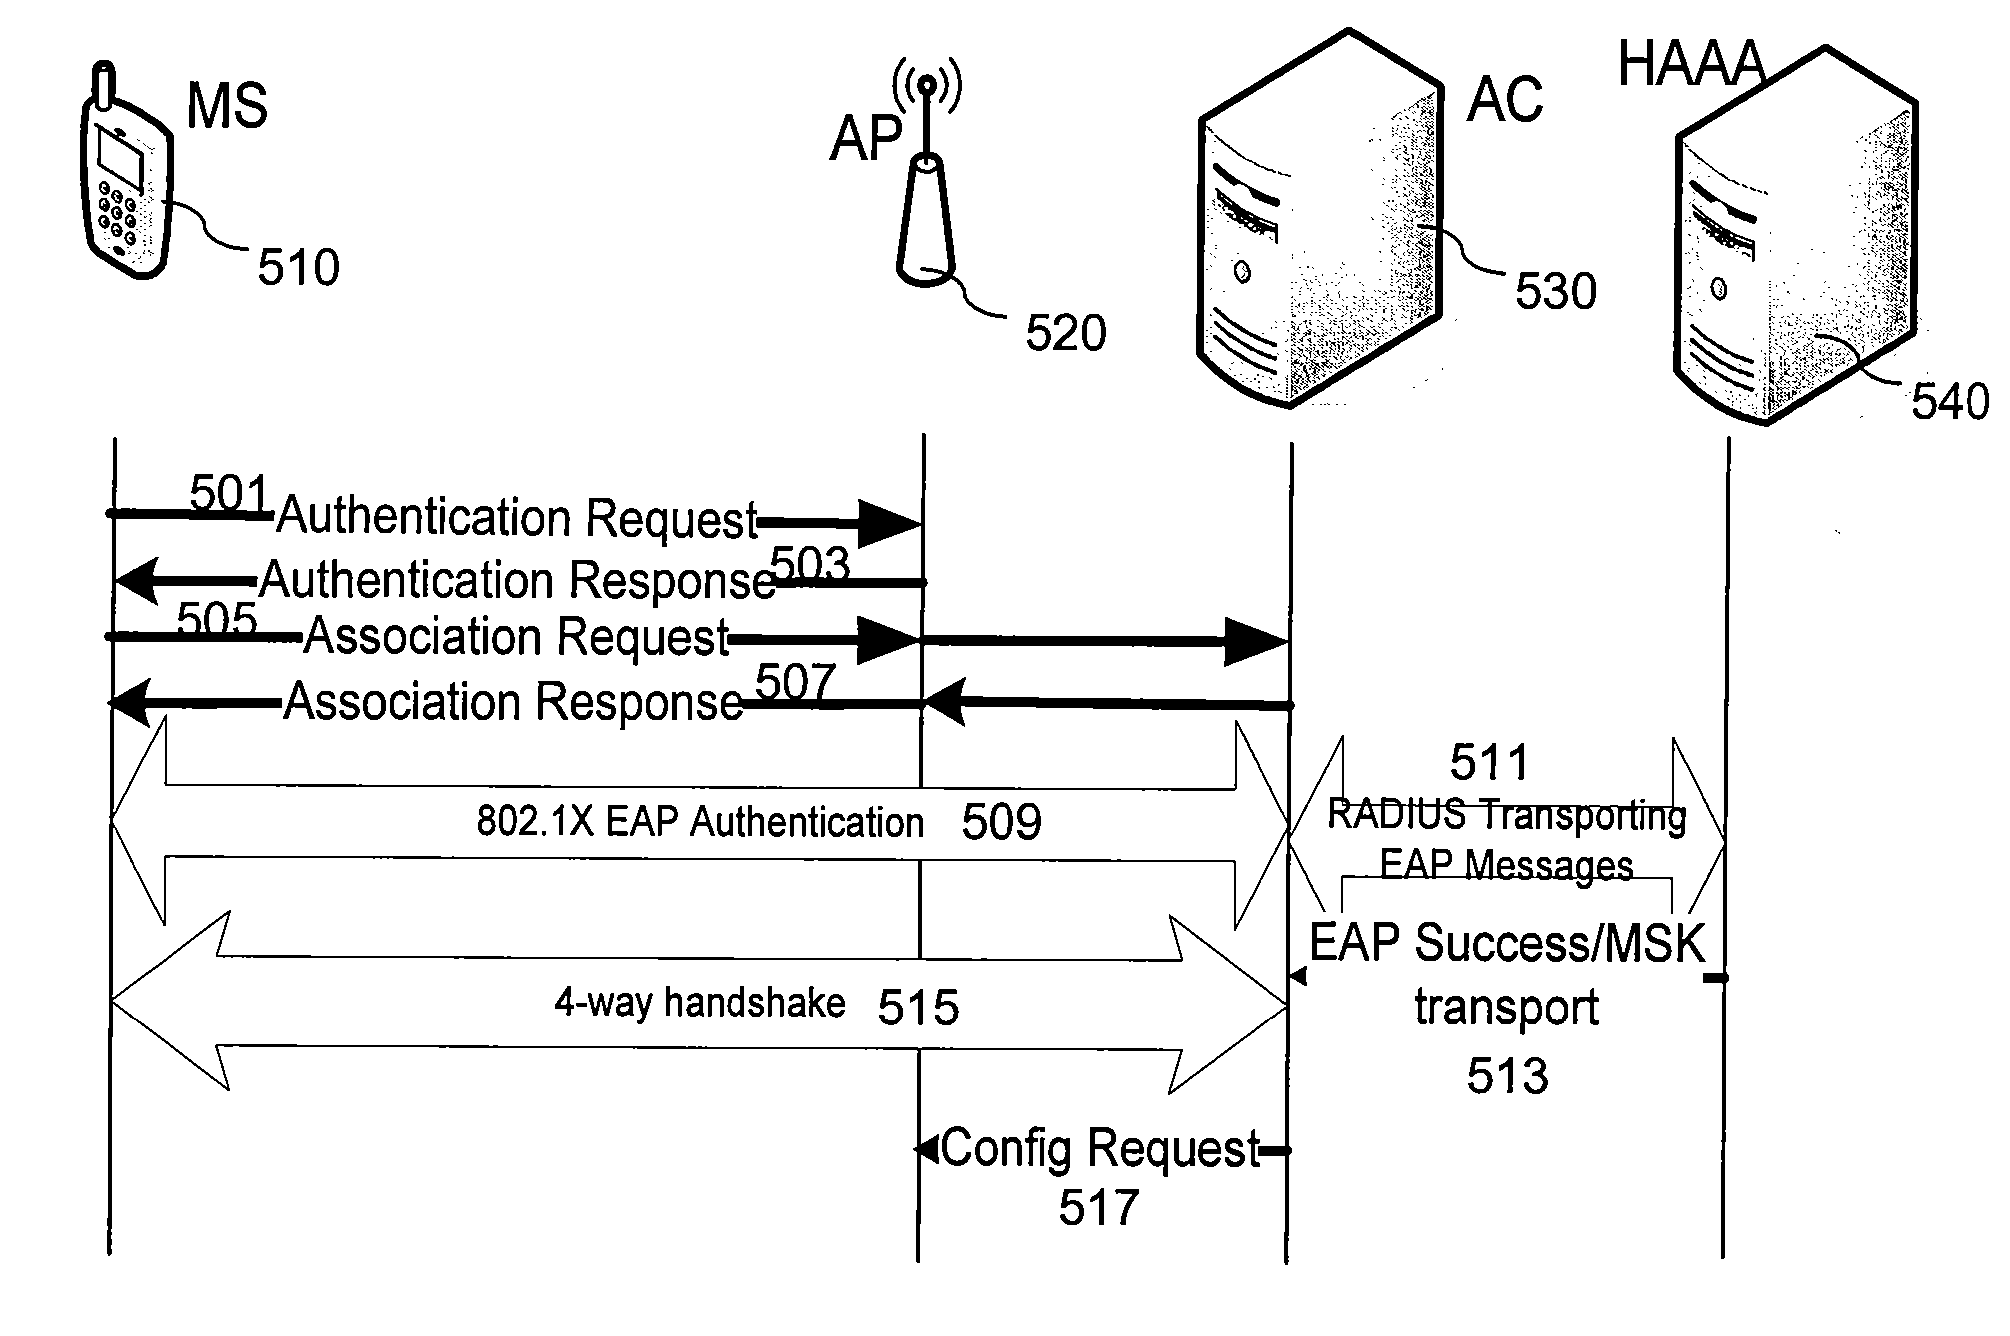 Method and system for capwap intra-domain authentication using 802.11r